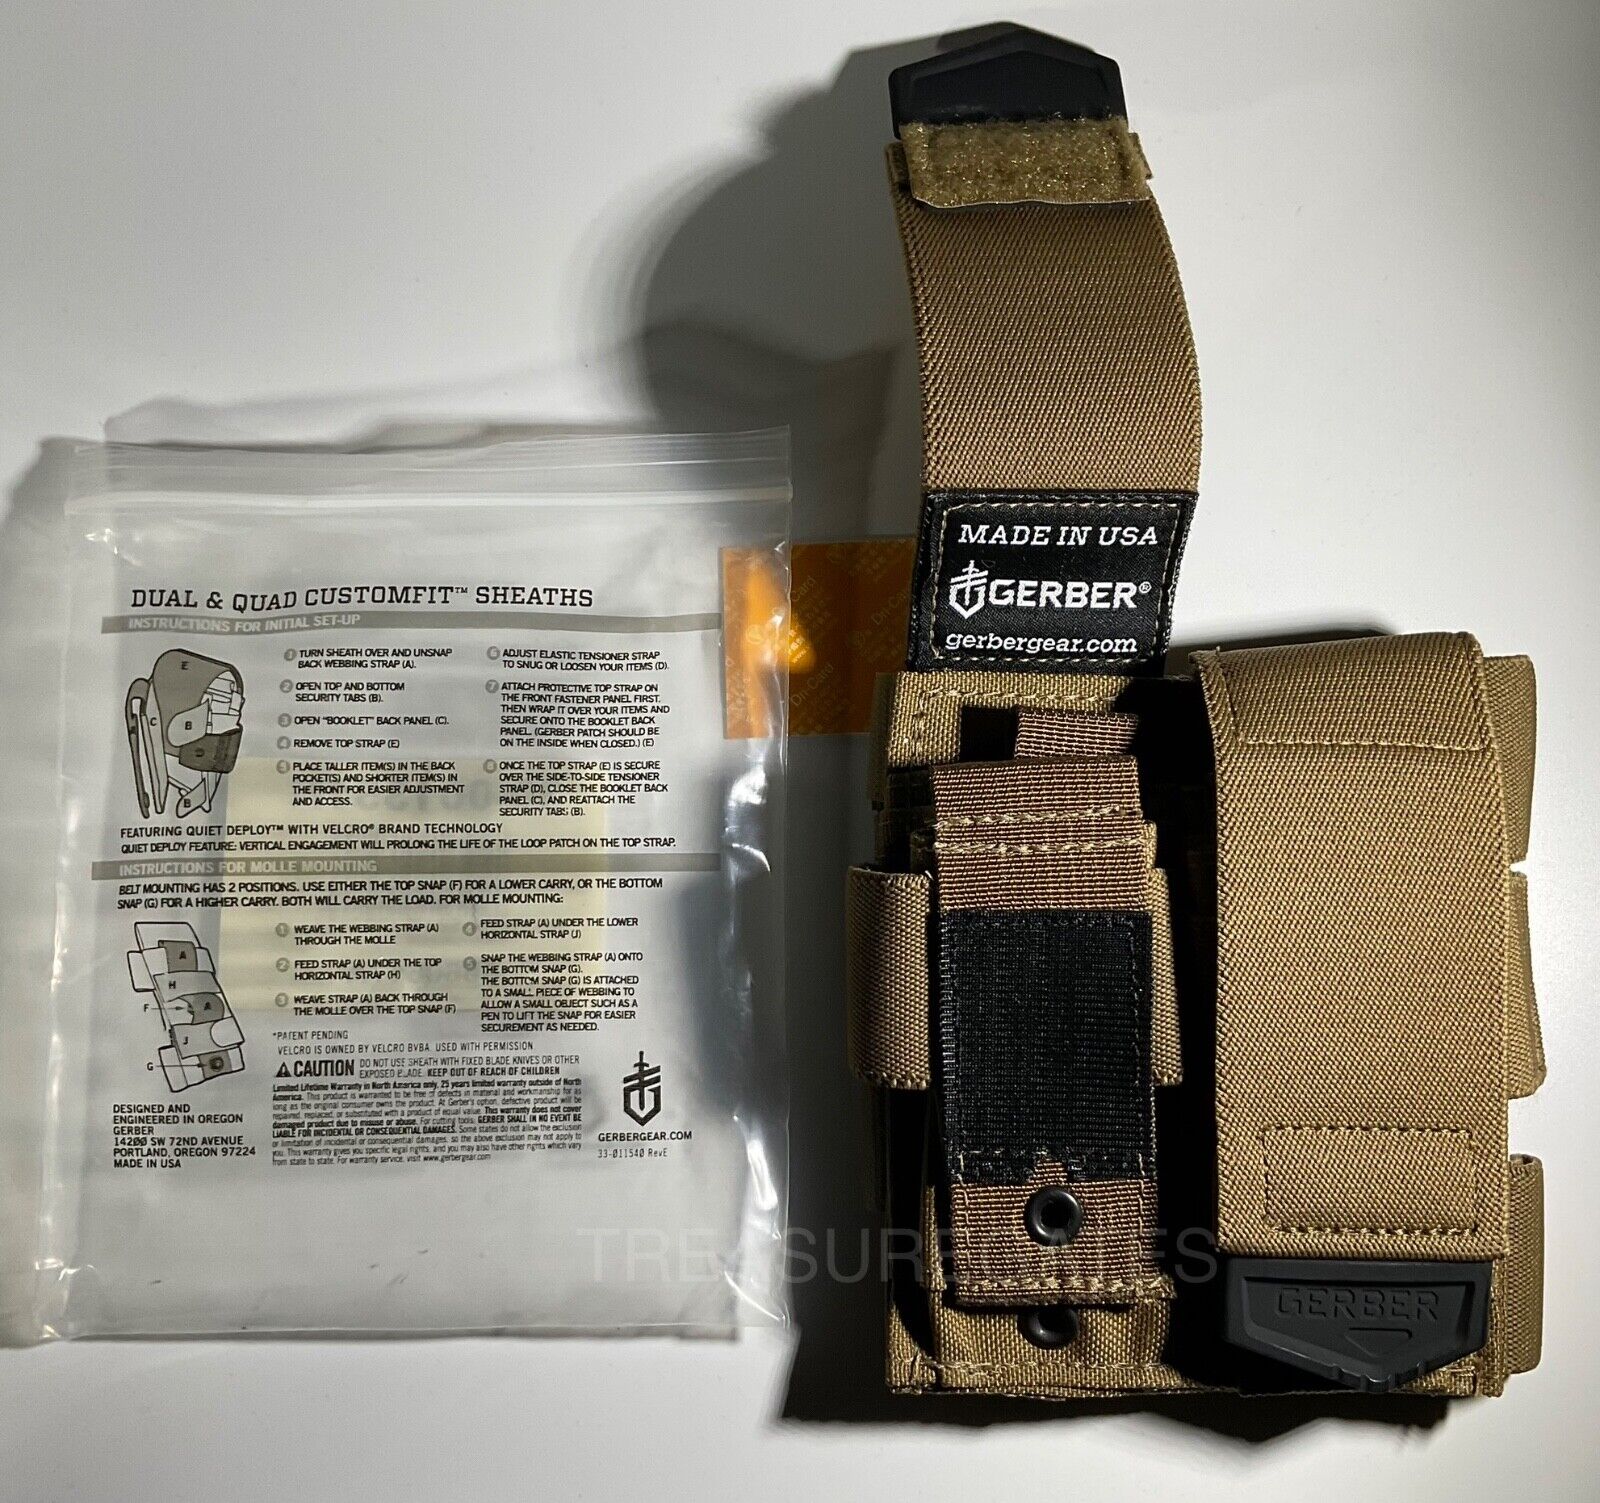 Gerber Custom Fit Dual Quad Sheath MOLLE Coyote Brown - MADE IN USA - NEW